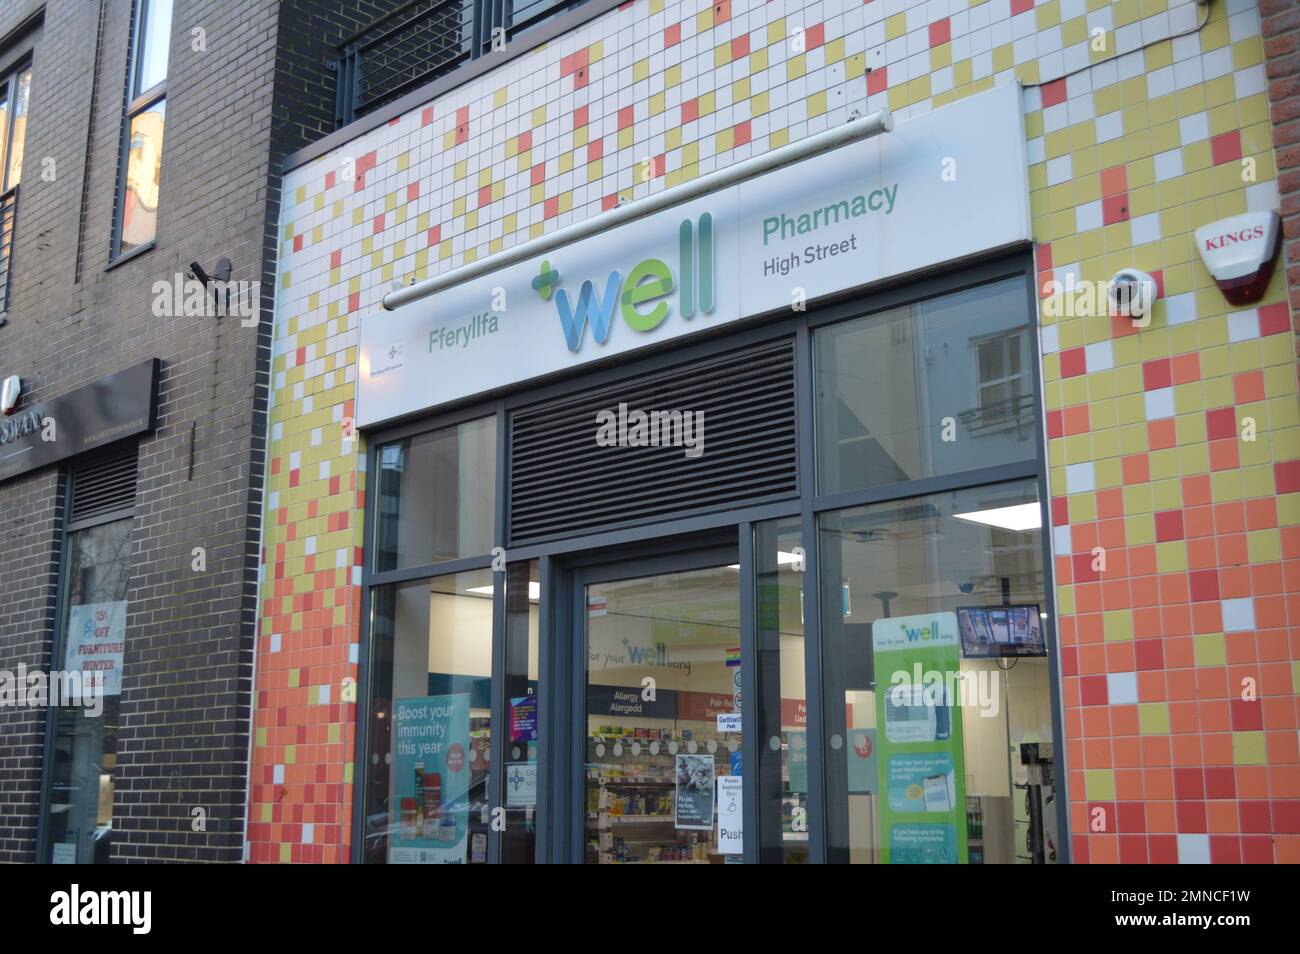 26th January 2023, Swansea, Wales, United Kingdom. Well Pharmacy outlet on High Street. Stock Photo